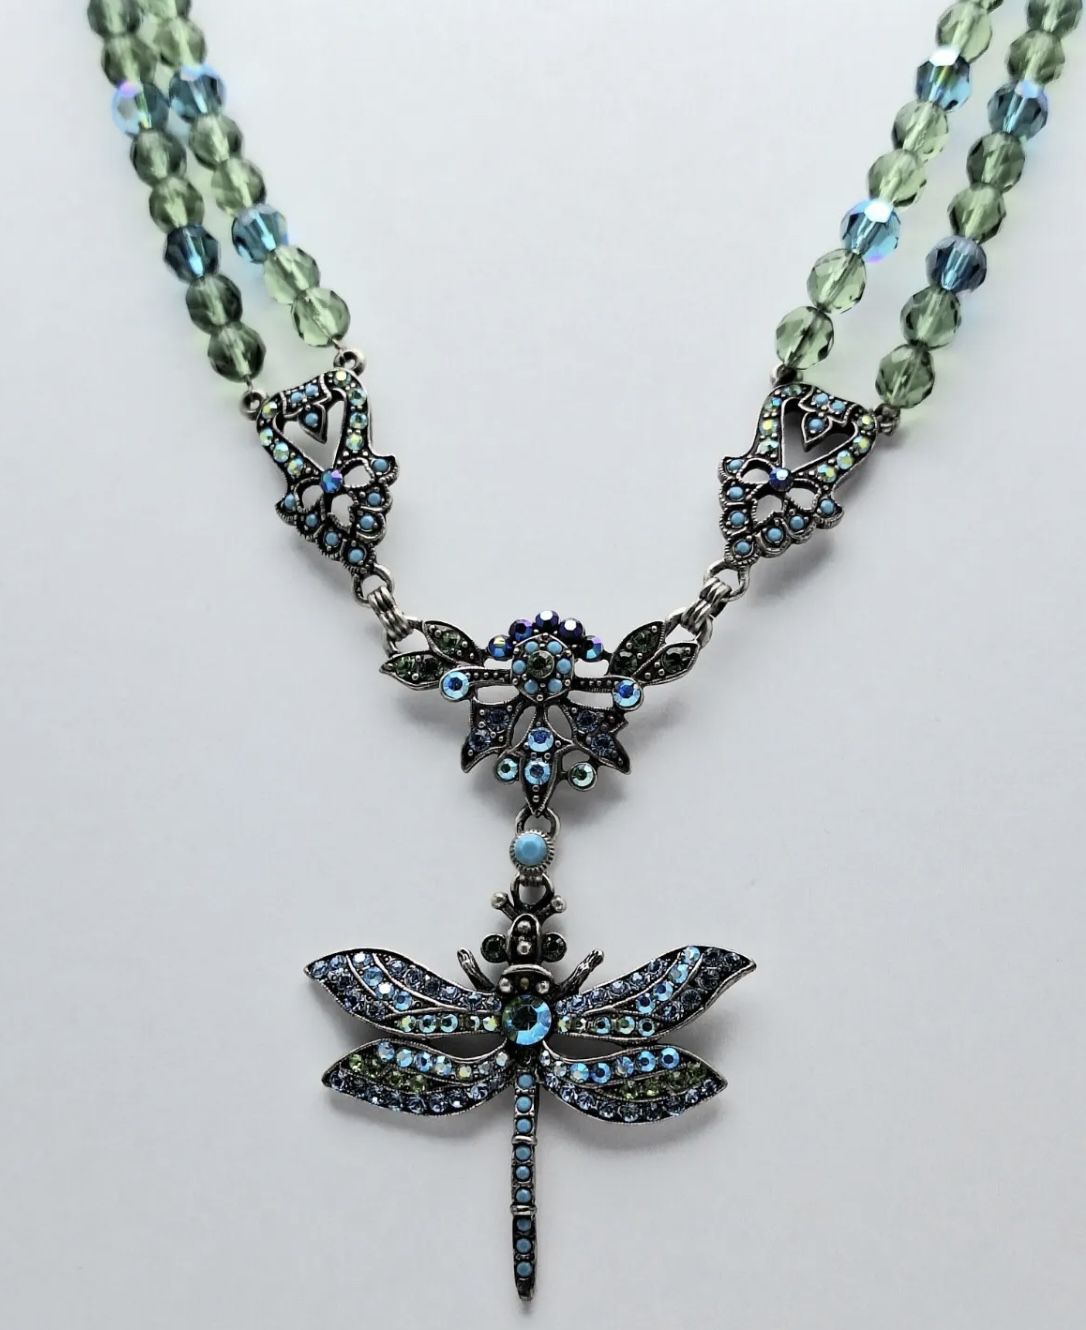 Vintage KIRKS FOLLY Stunning DRAGONFLY Statement NECKLACE Beaded Rhinestone This vintage Kirks Folly necklace is a stunning and unique piece that is s